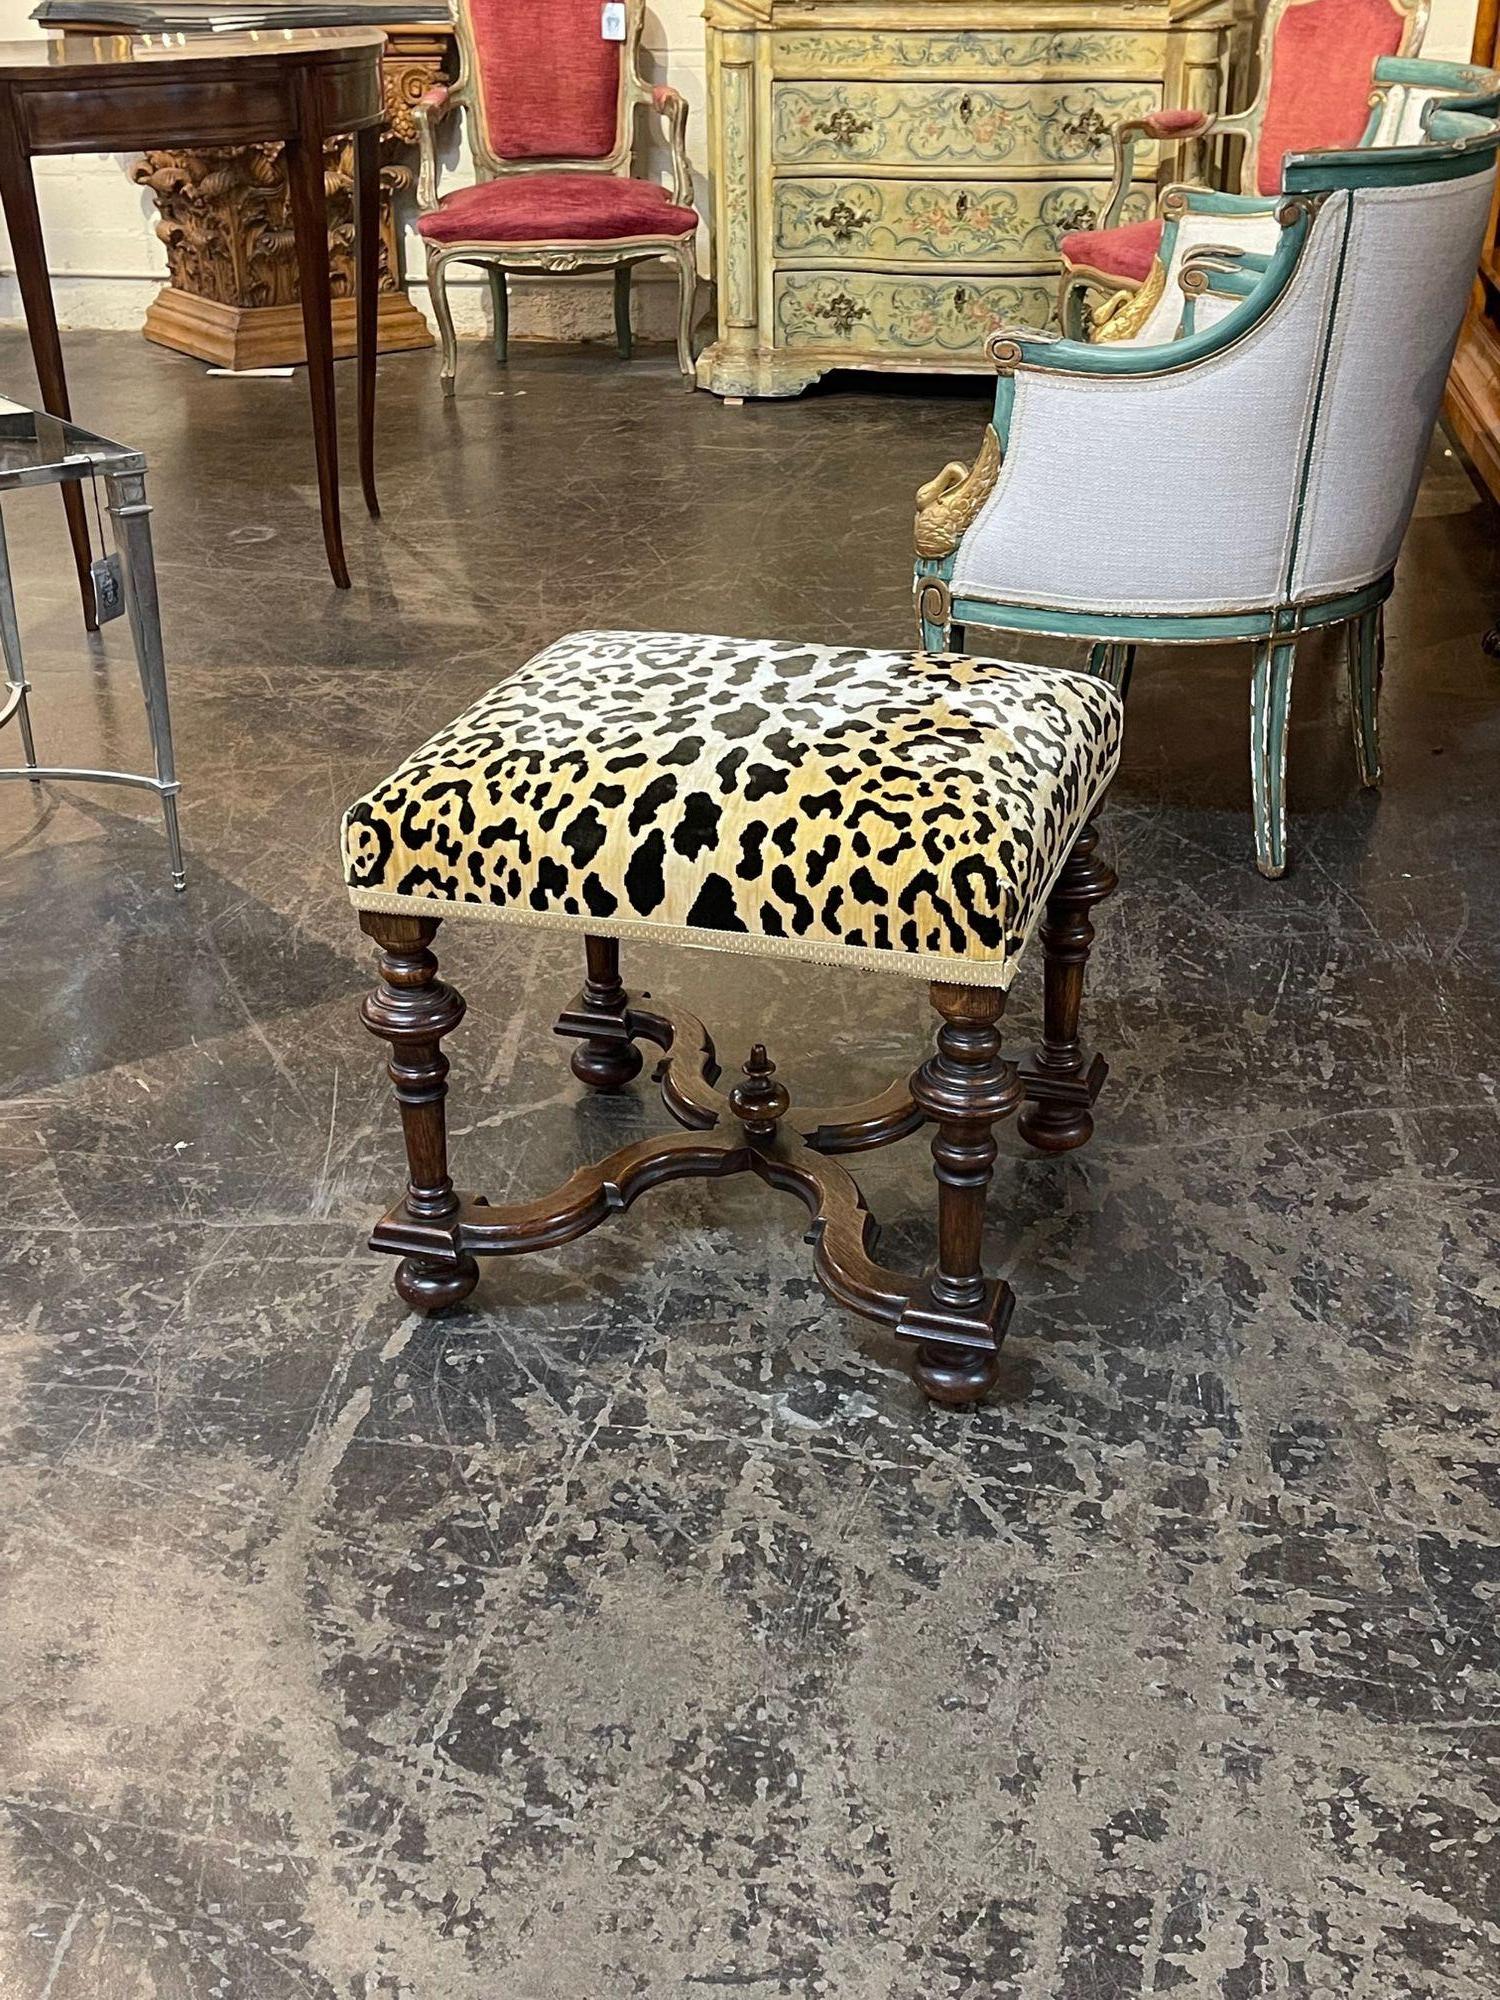 Gorgeous 19th century English Jocobean style walnut stool. Featuring nice carved legs and upholstered in a lovely cheetah fabric. A great accessory!